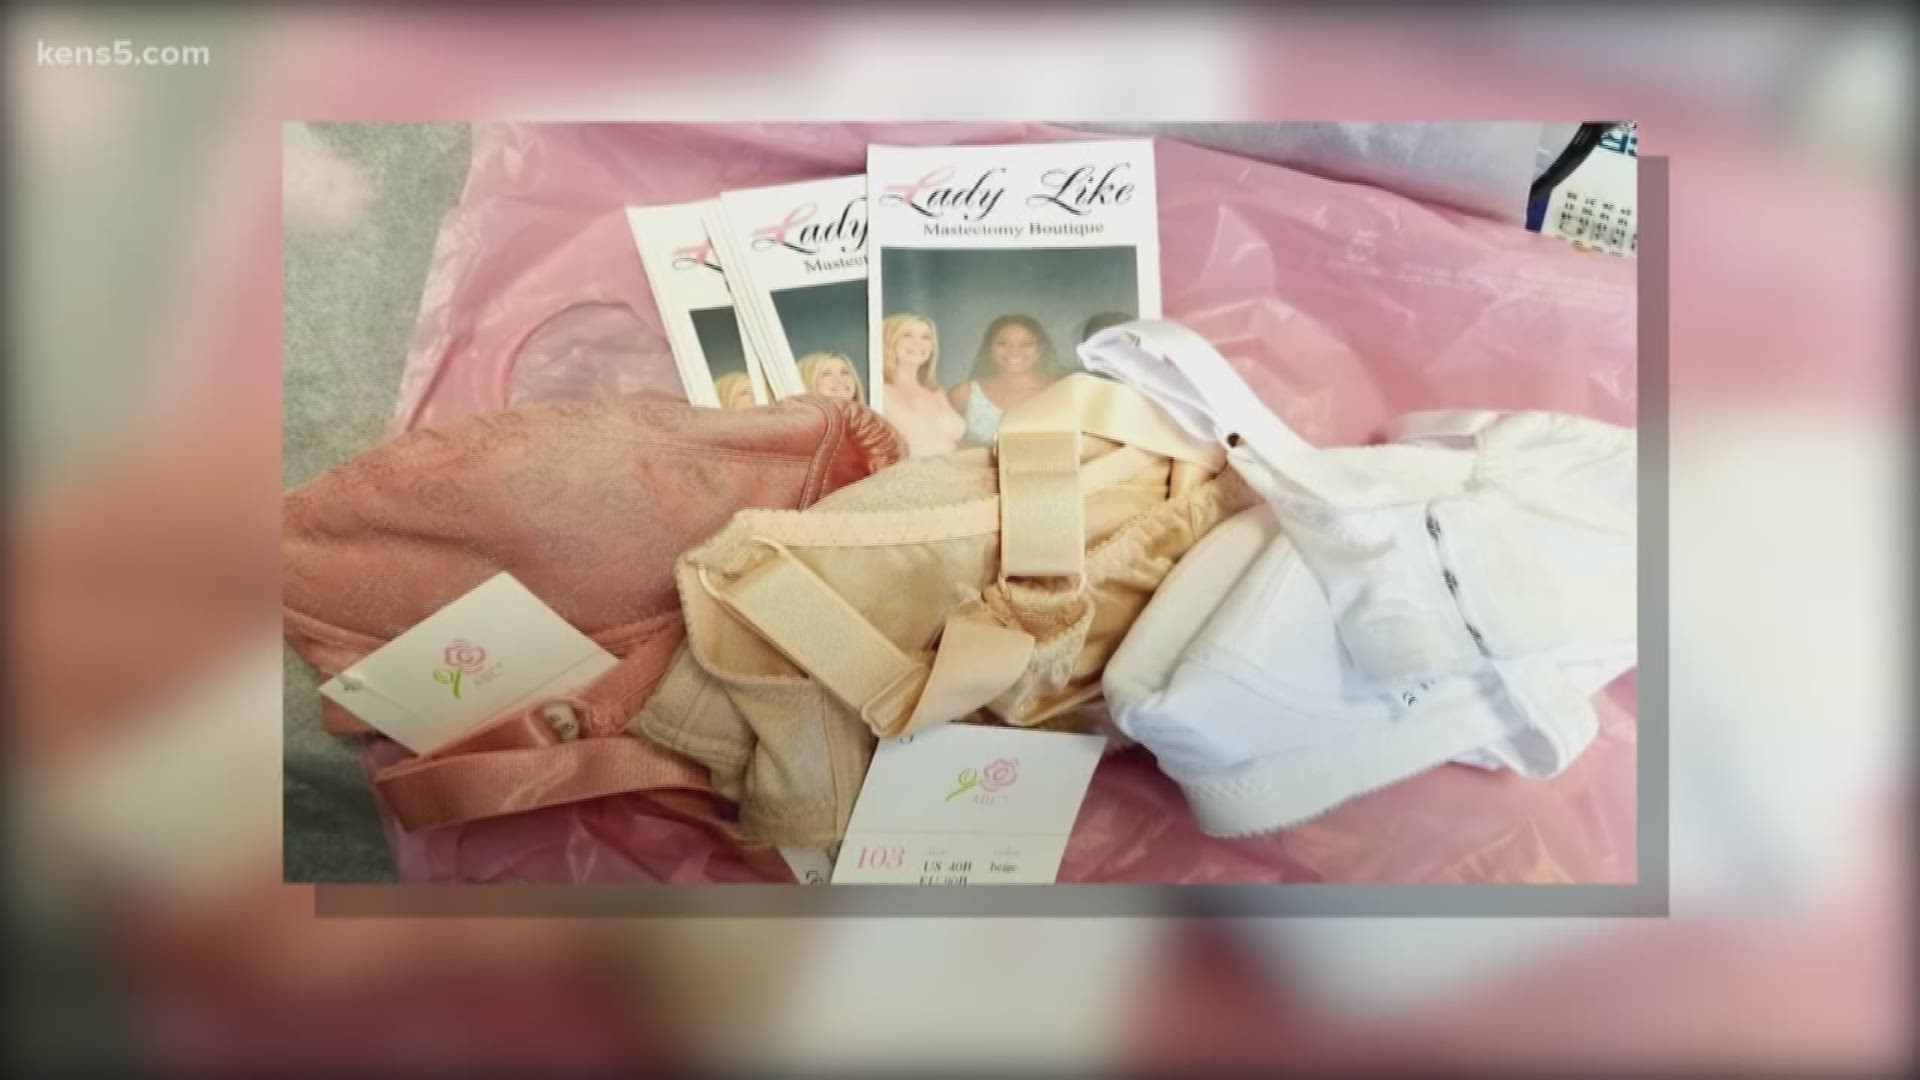 See how a local organization is collecting mastectomy bras for women battling breast cancer.